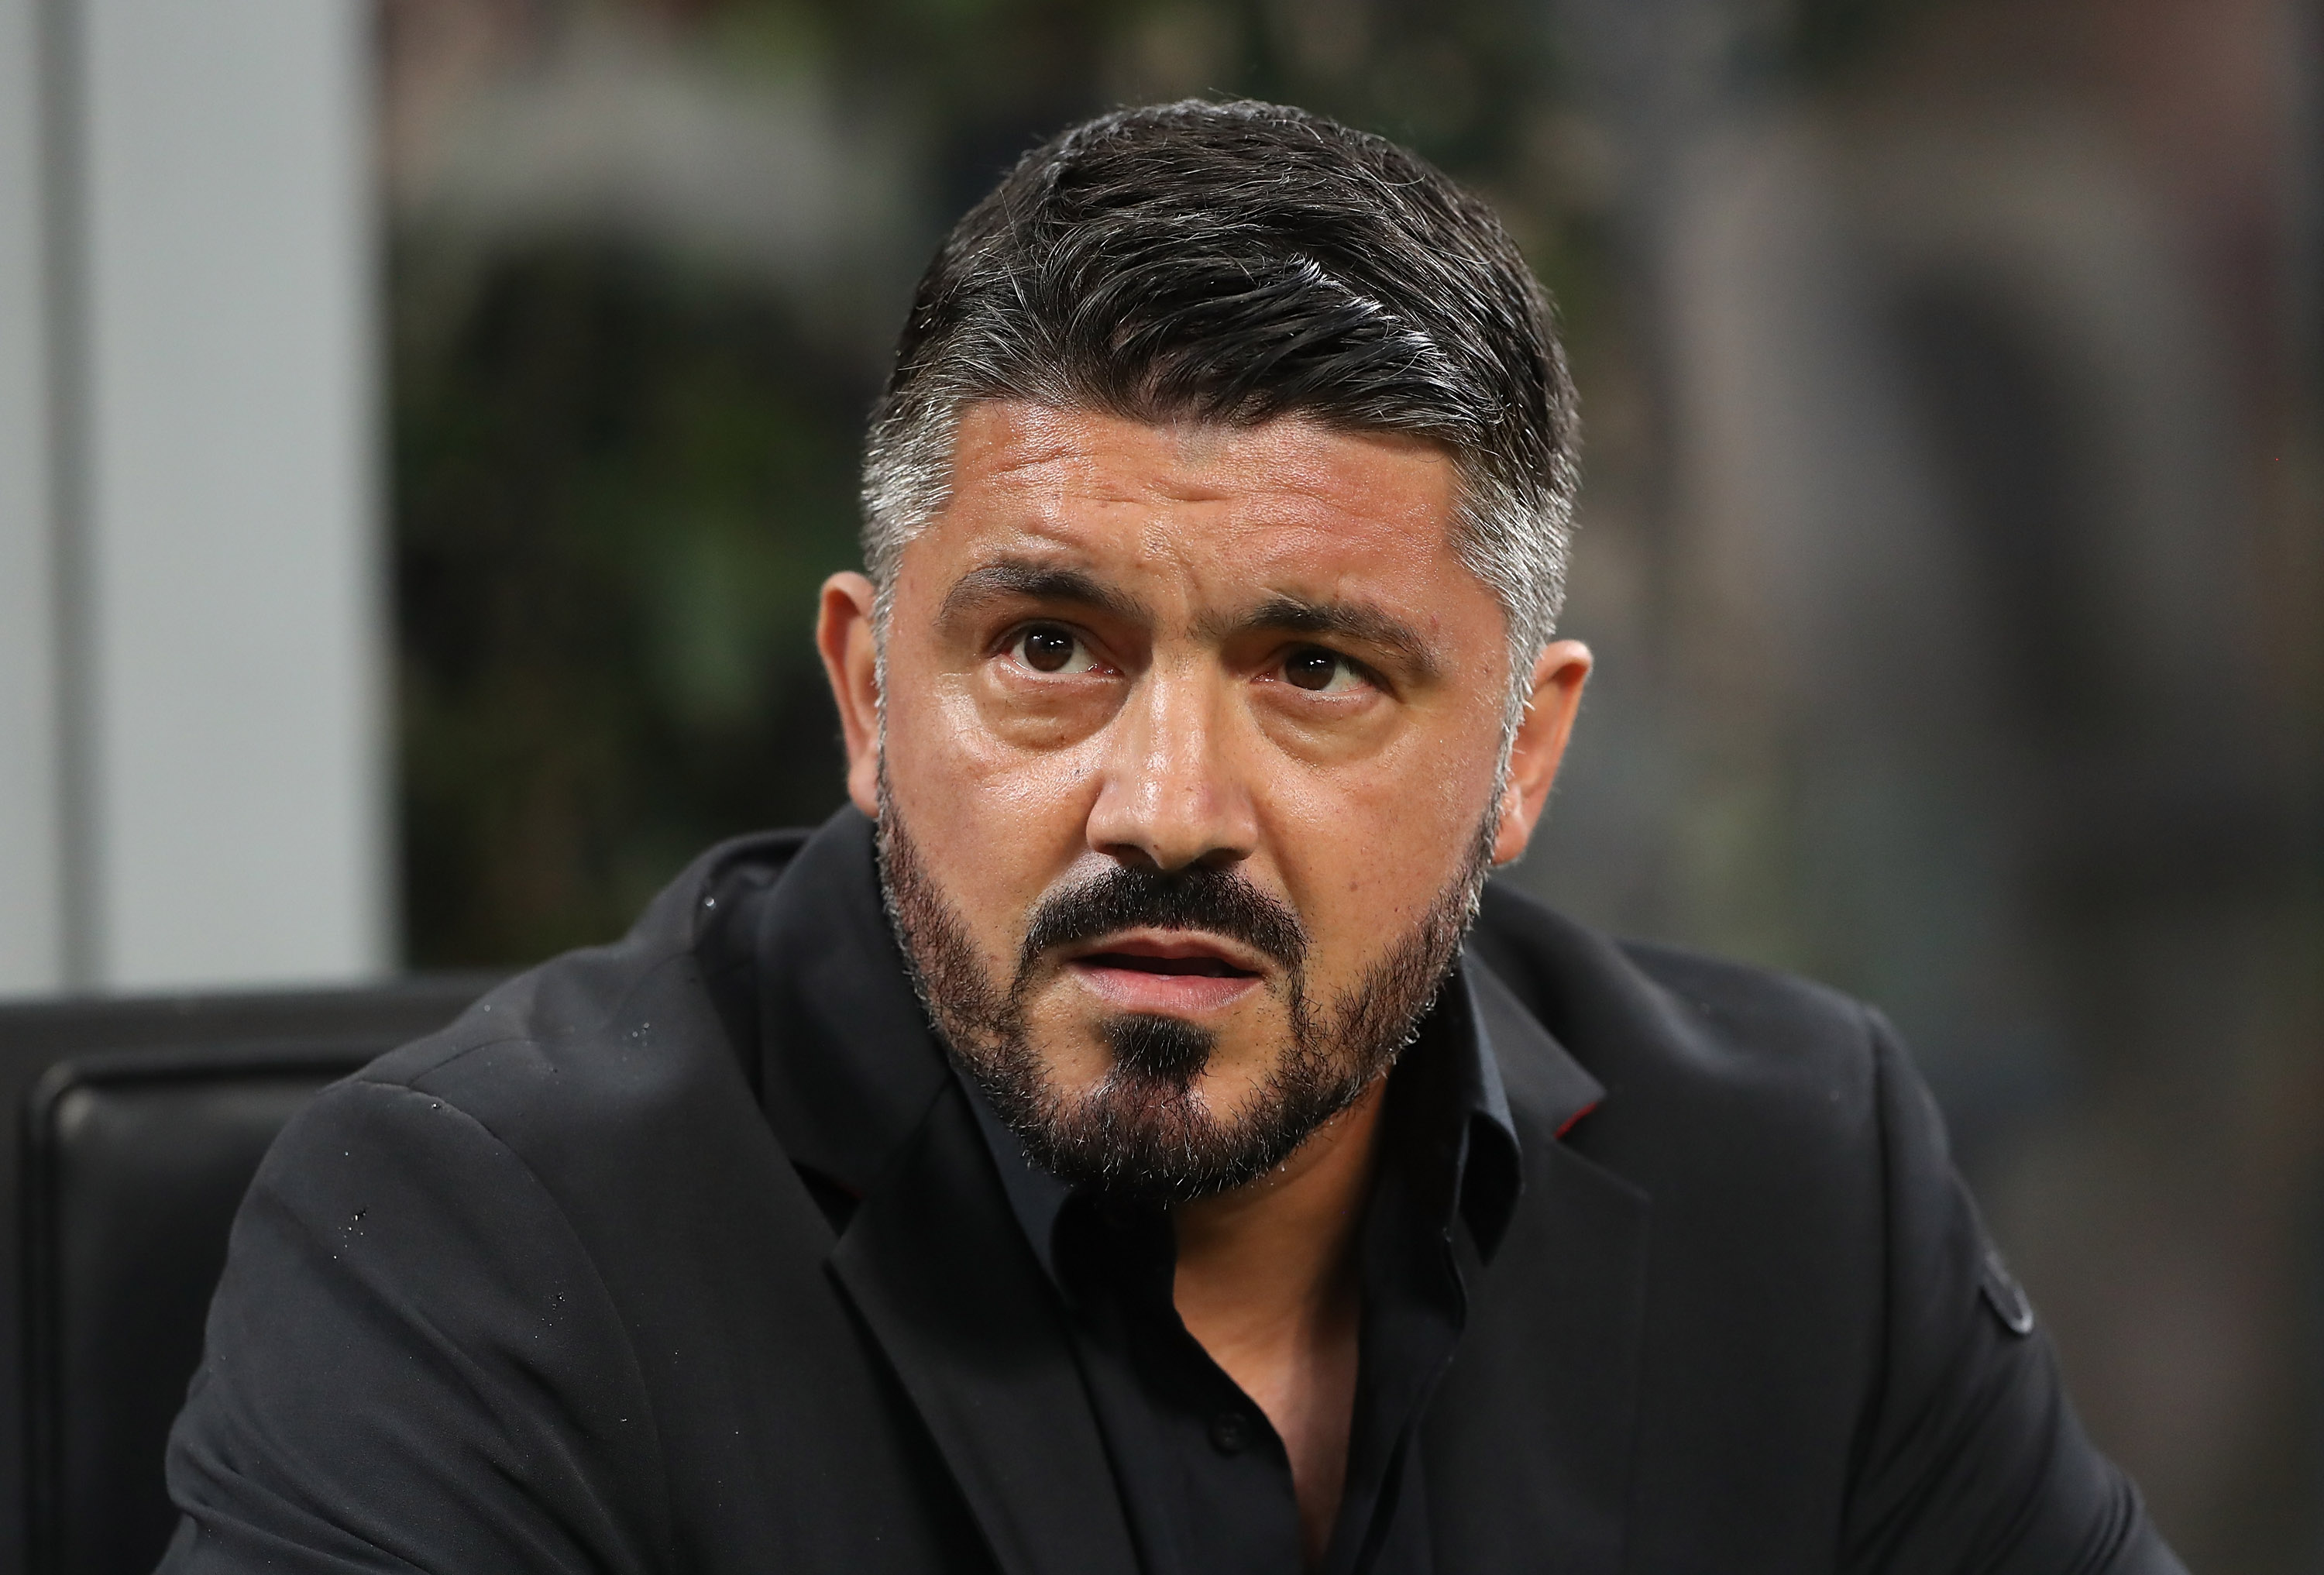 MILAN, ITALY - AUGUST 31: AC Milan coach Gennaro Gattuso looks on before the serie A match between AC Milan and AS Roma at Stadio Giuseppe Meazza on August 31, 2018 in Milan, Italy. (Photo by Marco Luzzani/Getty Images)